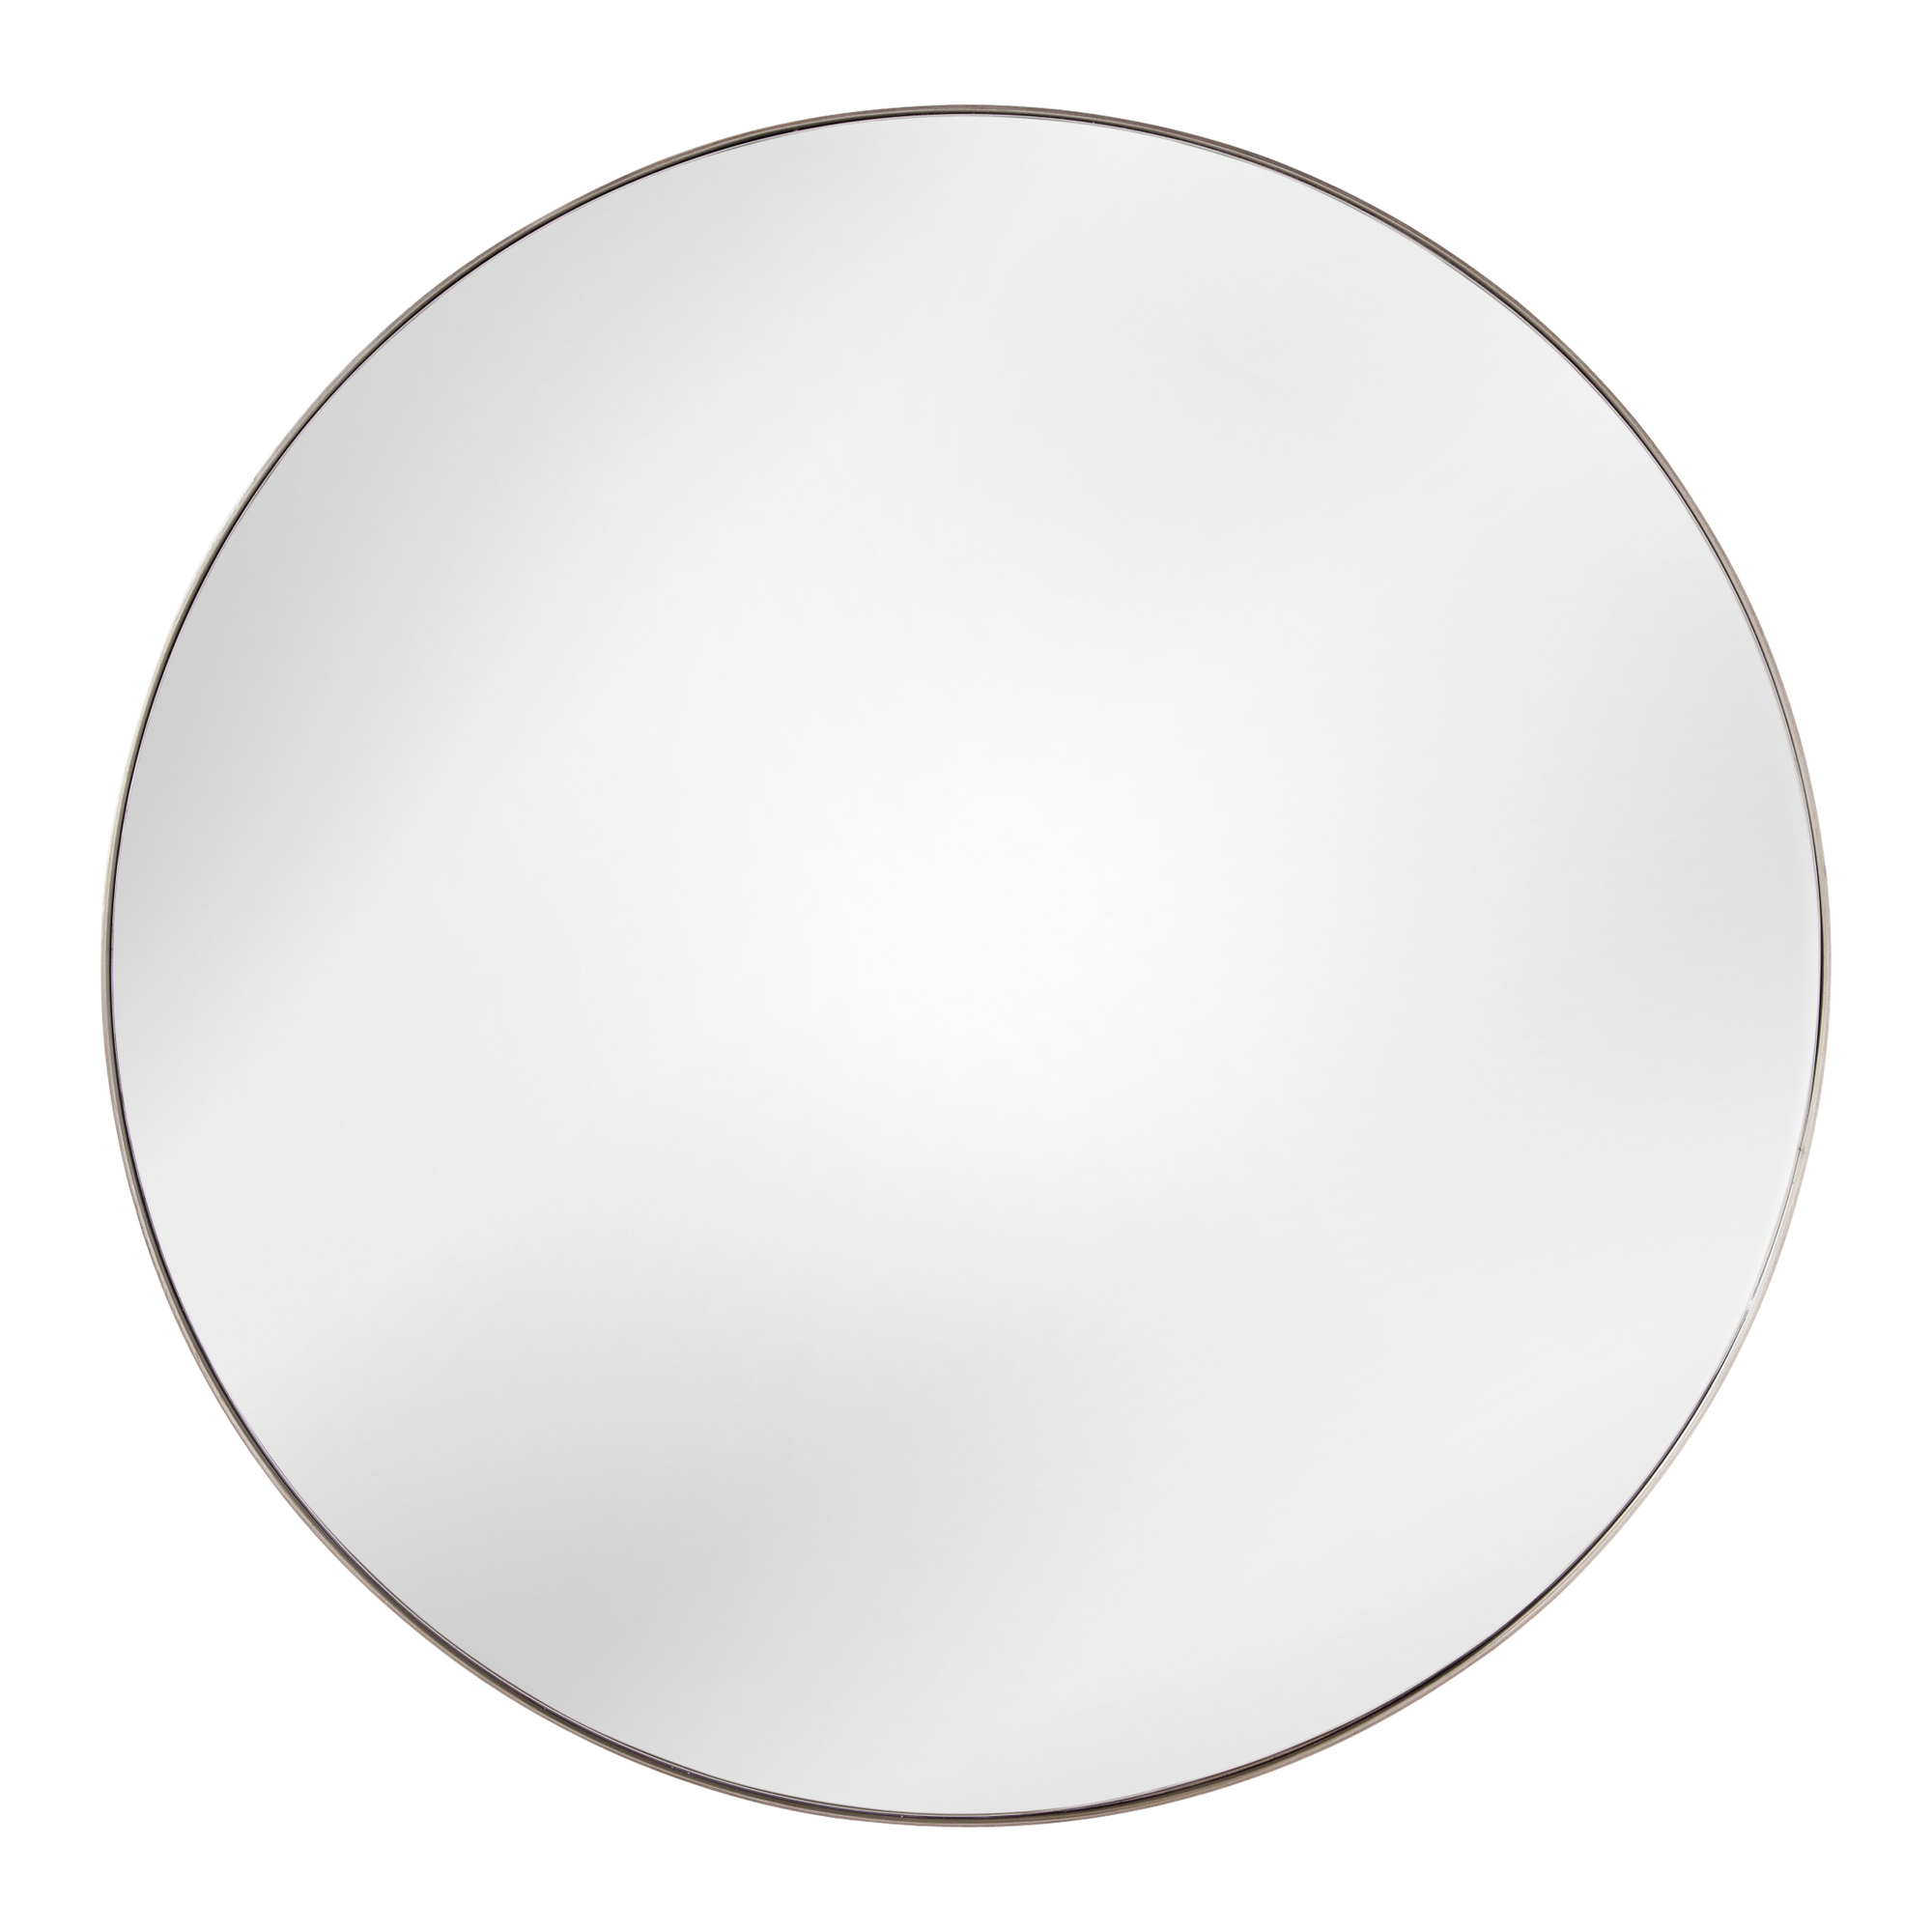 The Pisces Wall mirror shows the elegance of simplicity with a thin metal frame finished in silver.